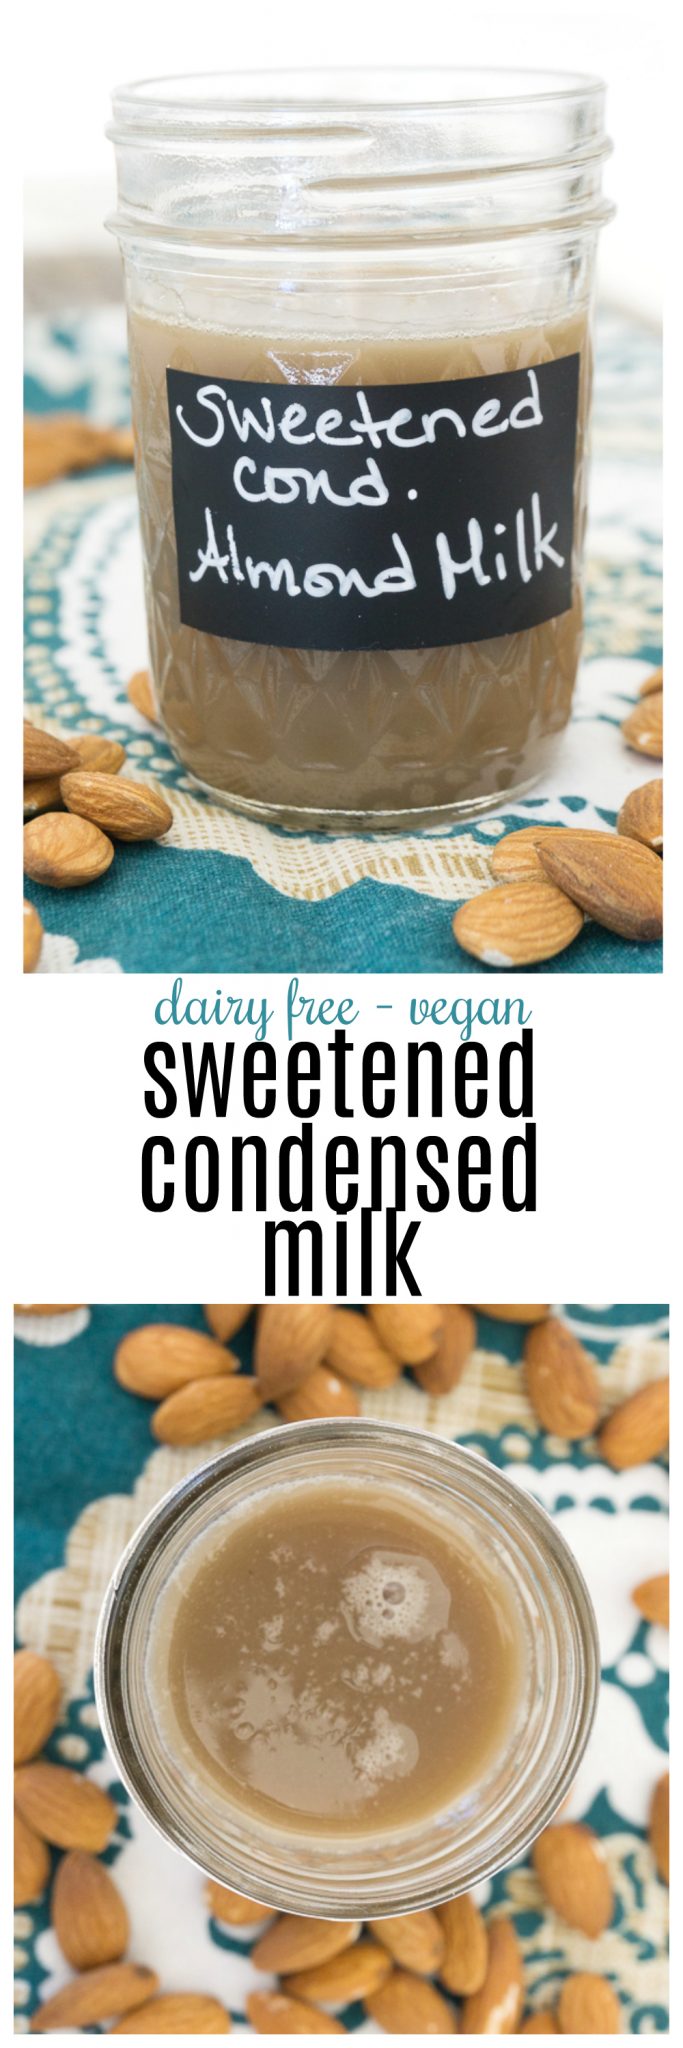 The perfect dairy free substitute for sweetened condensed milk is this homemade Sweetened Condensed Almond Milk. 